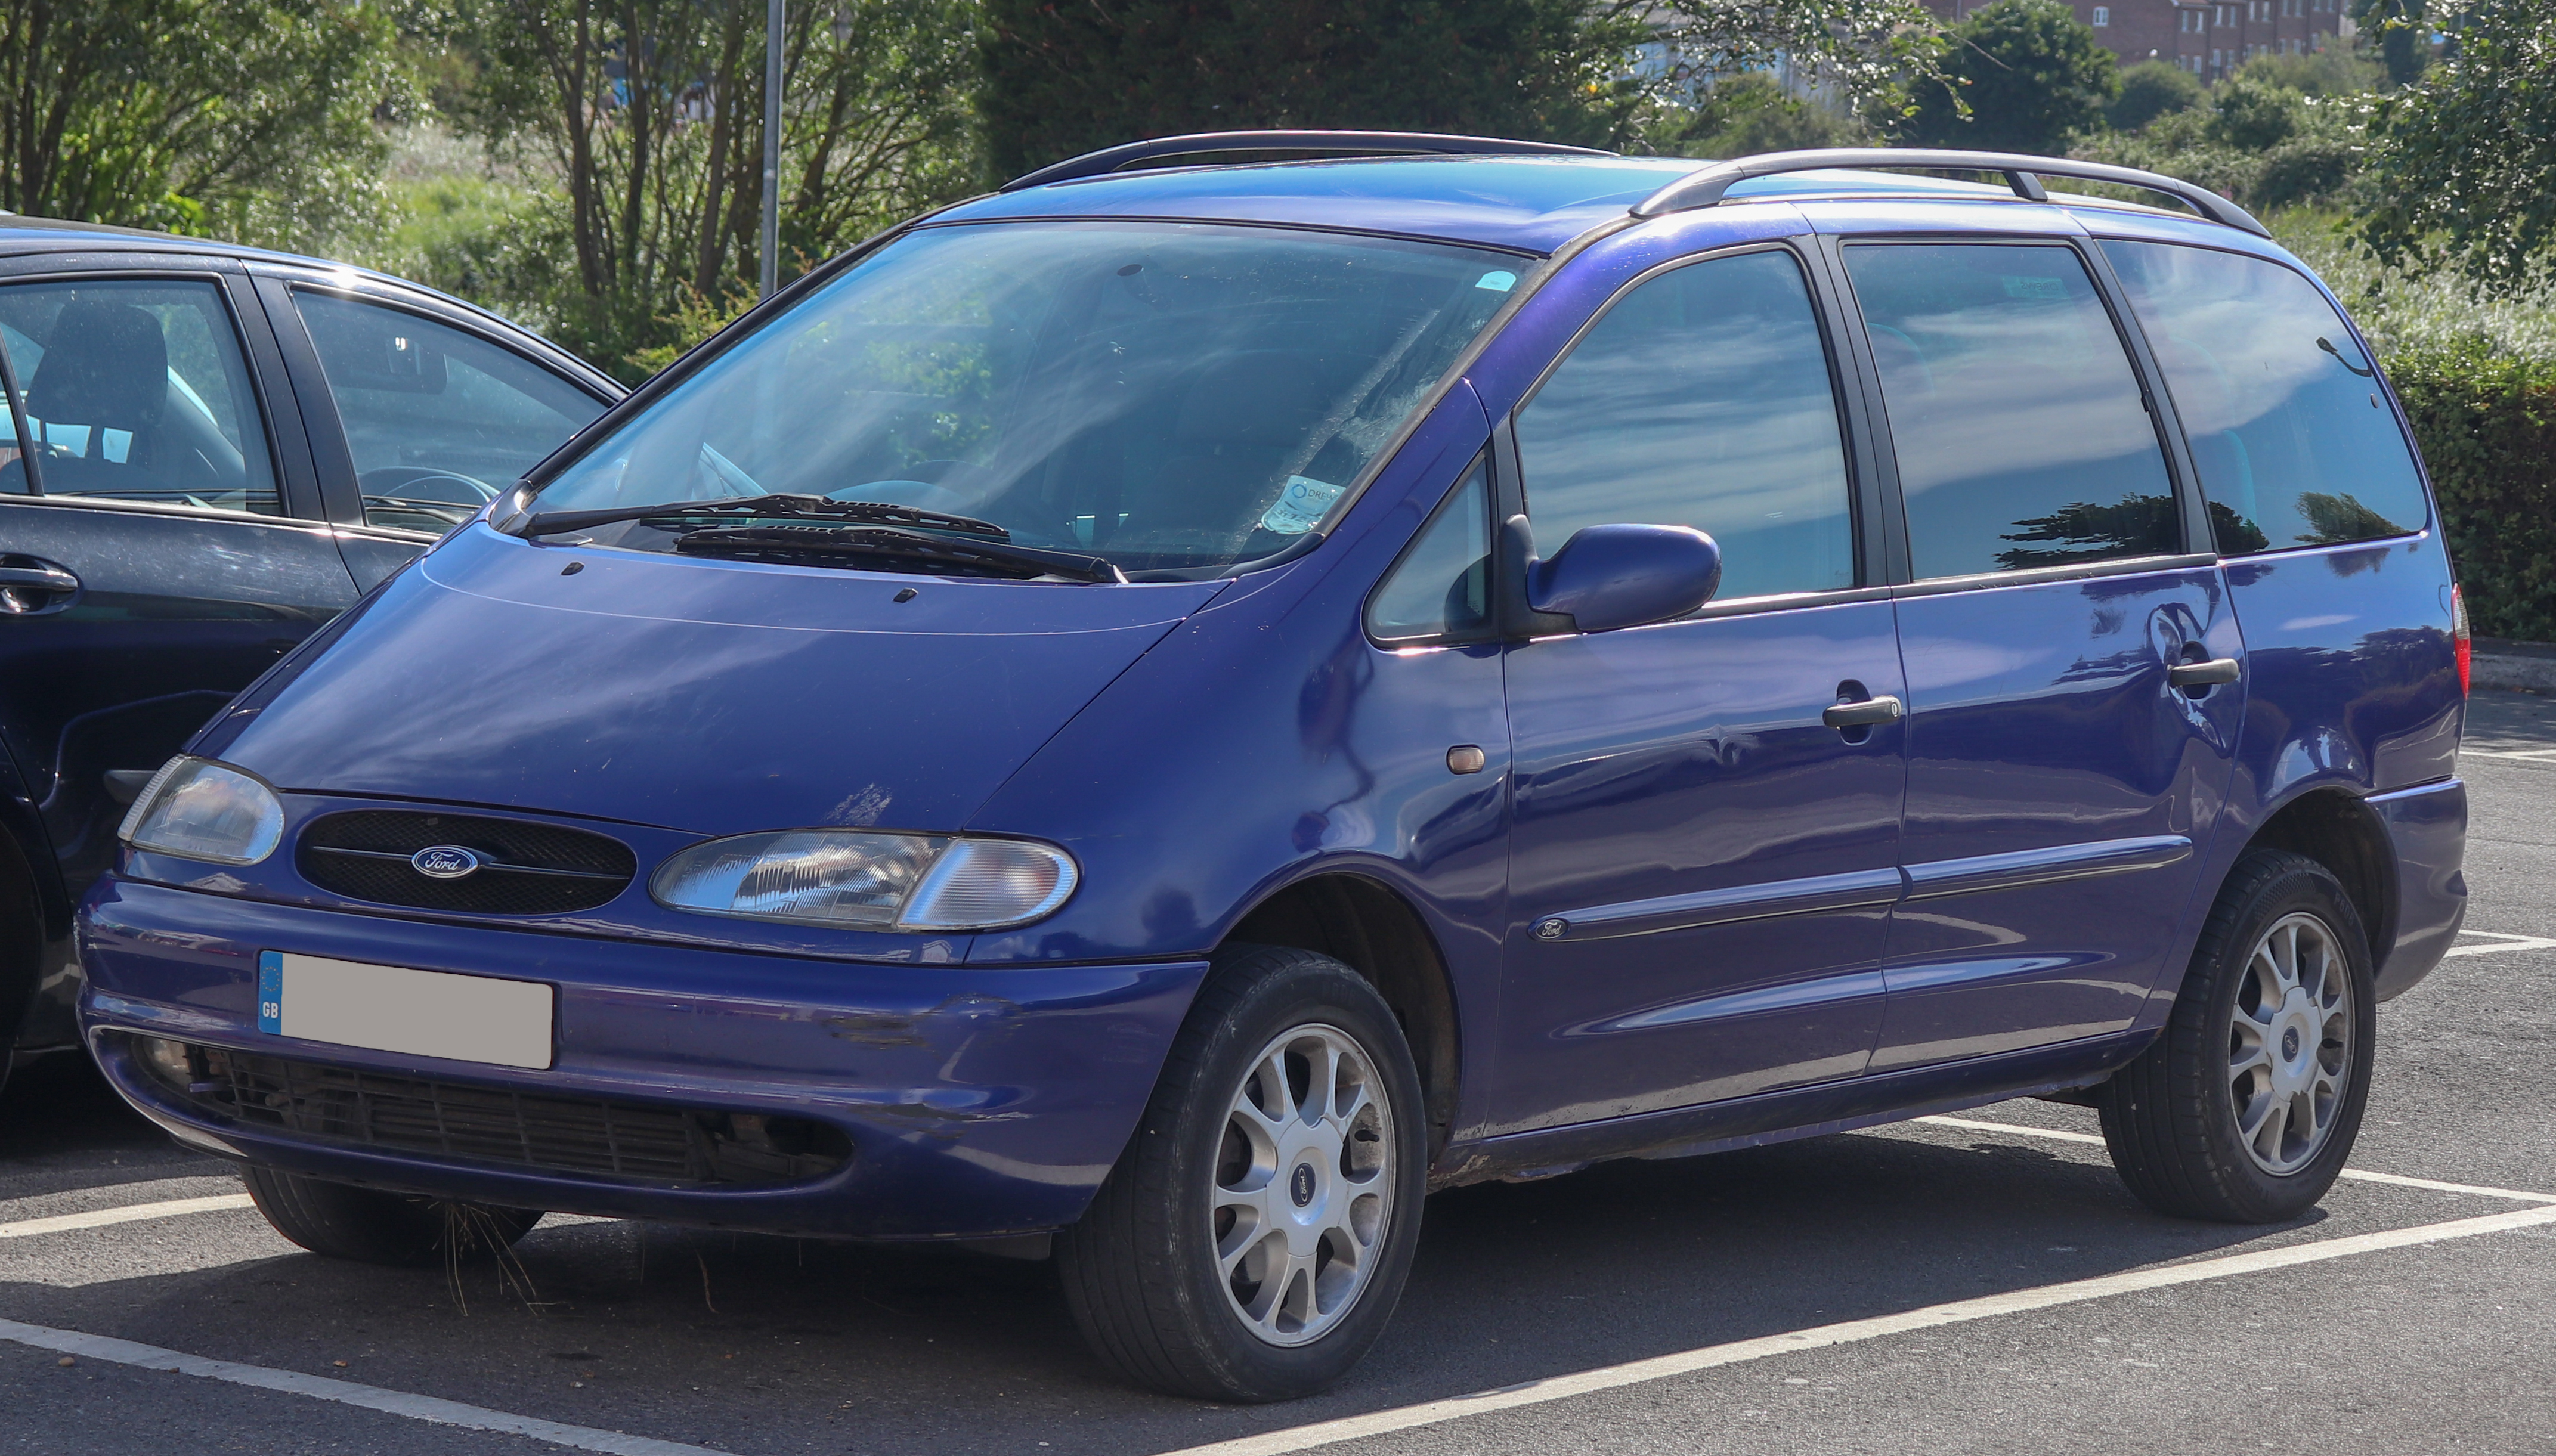 File:2000 Ford Galaxy Zetec TD 1.9 Front.jpg - Wikimedia Commons